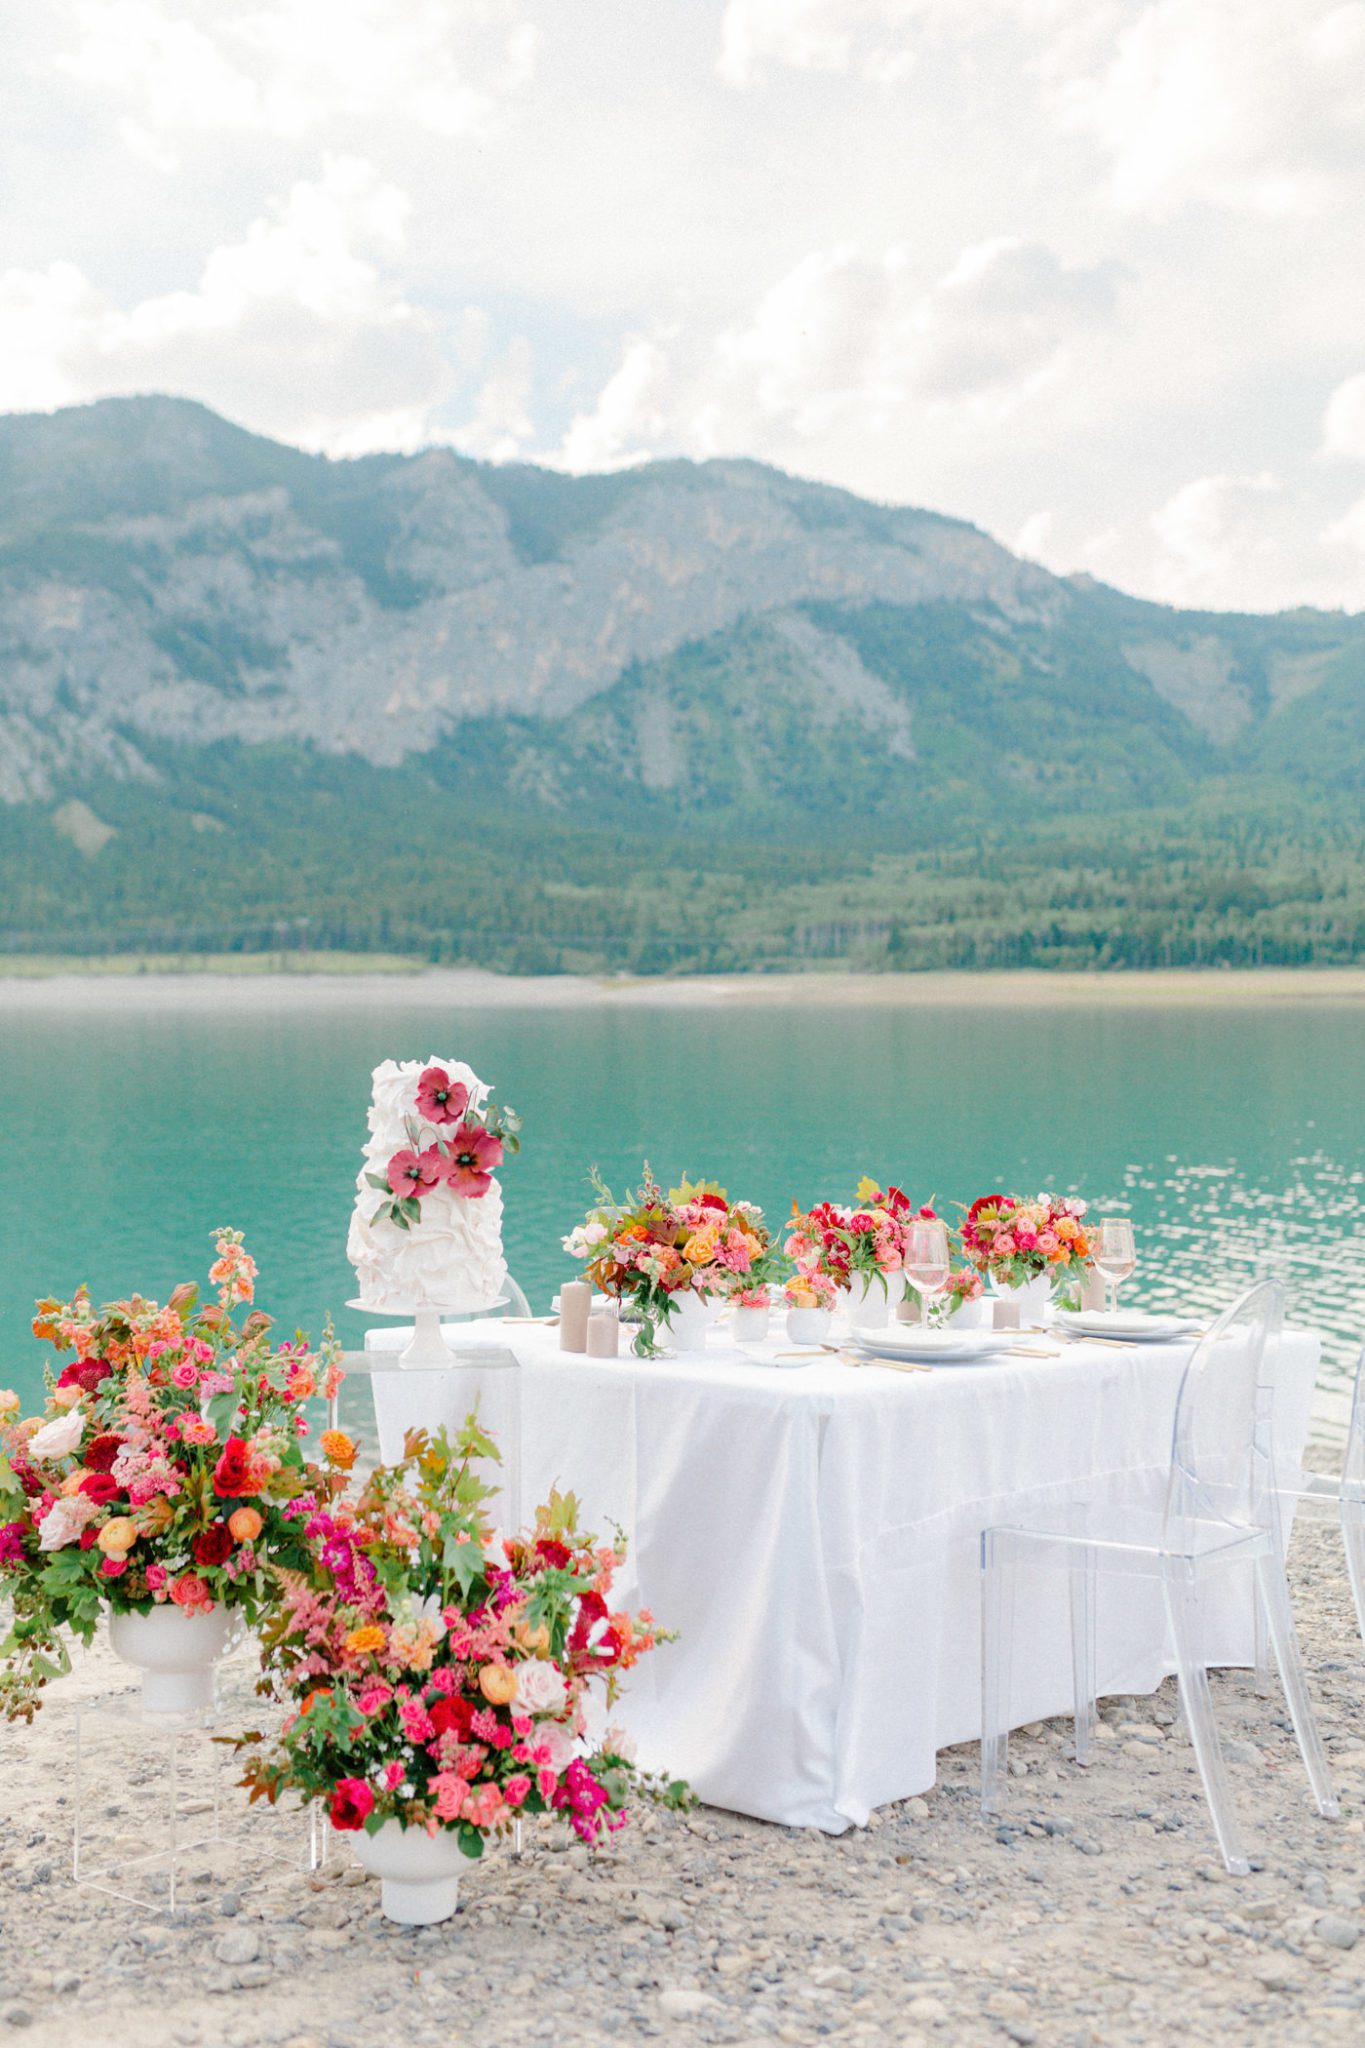 Vibrant floral inspiration in red and orange hues for a dreamy lakeside wedding